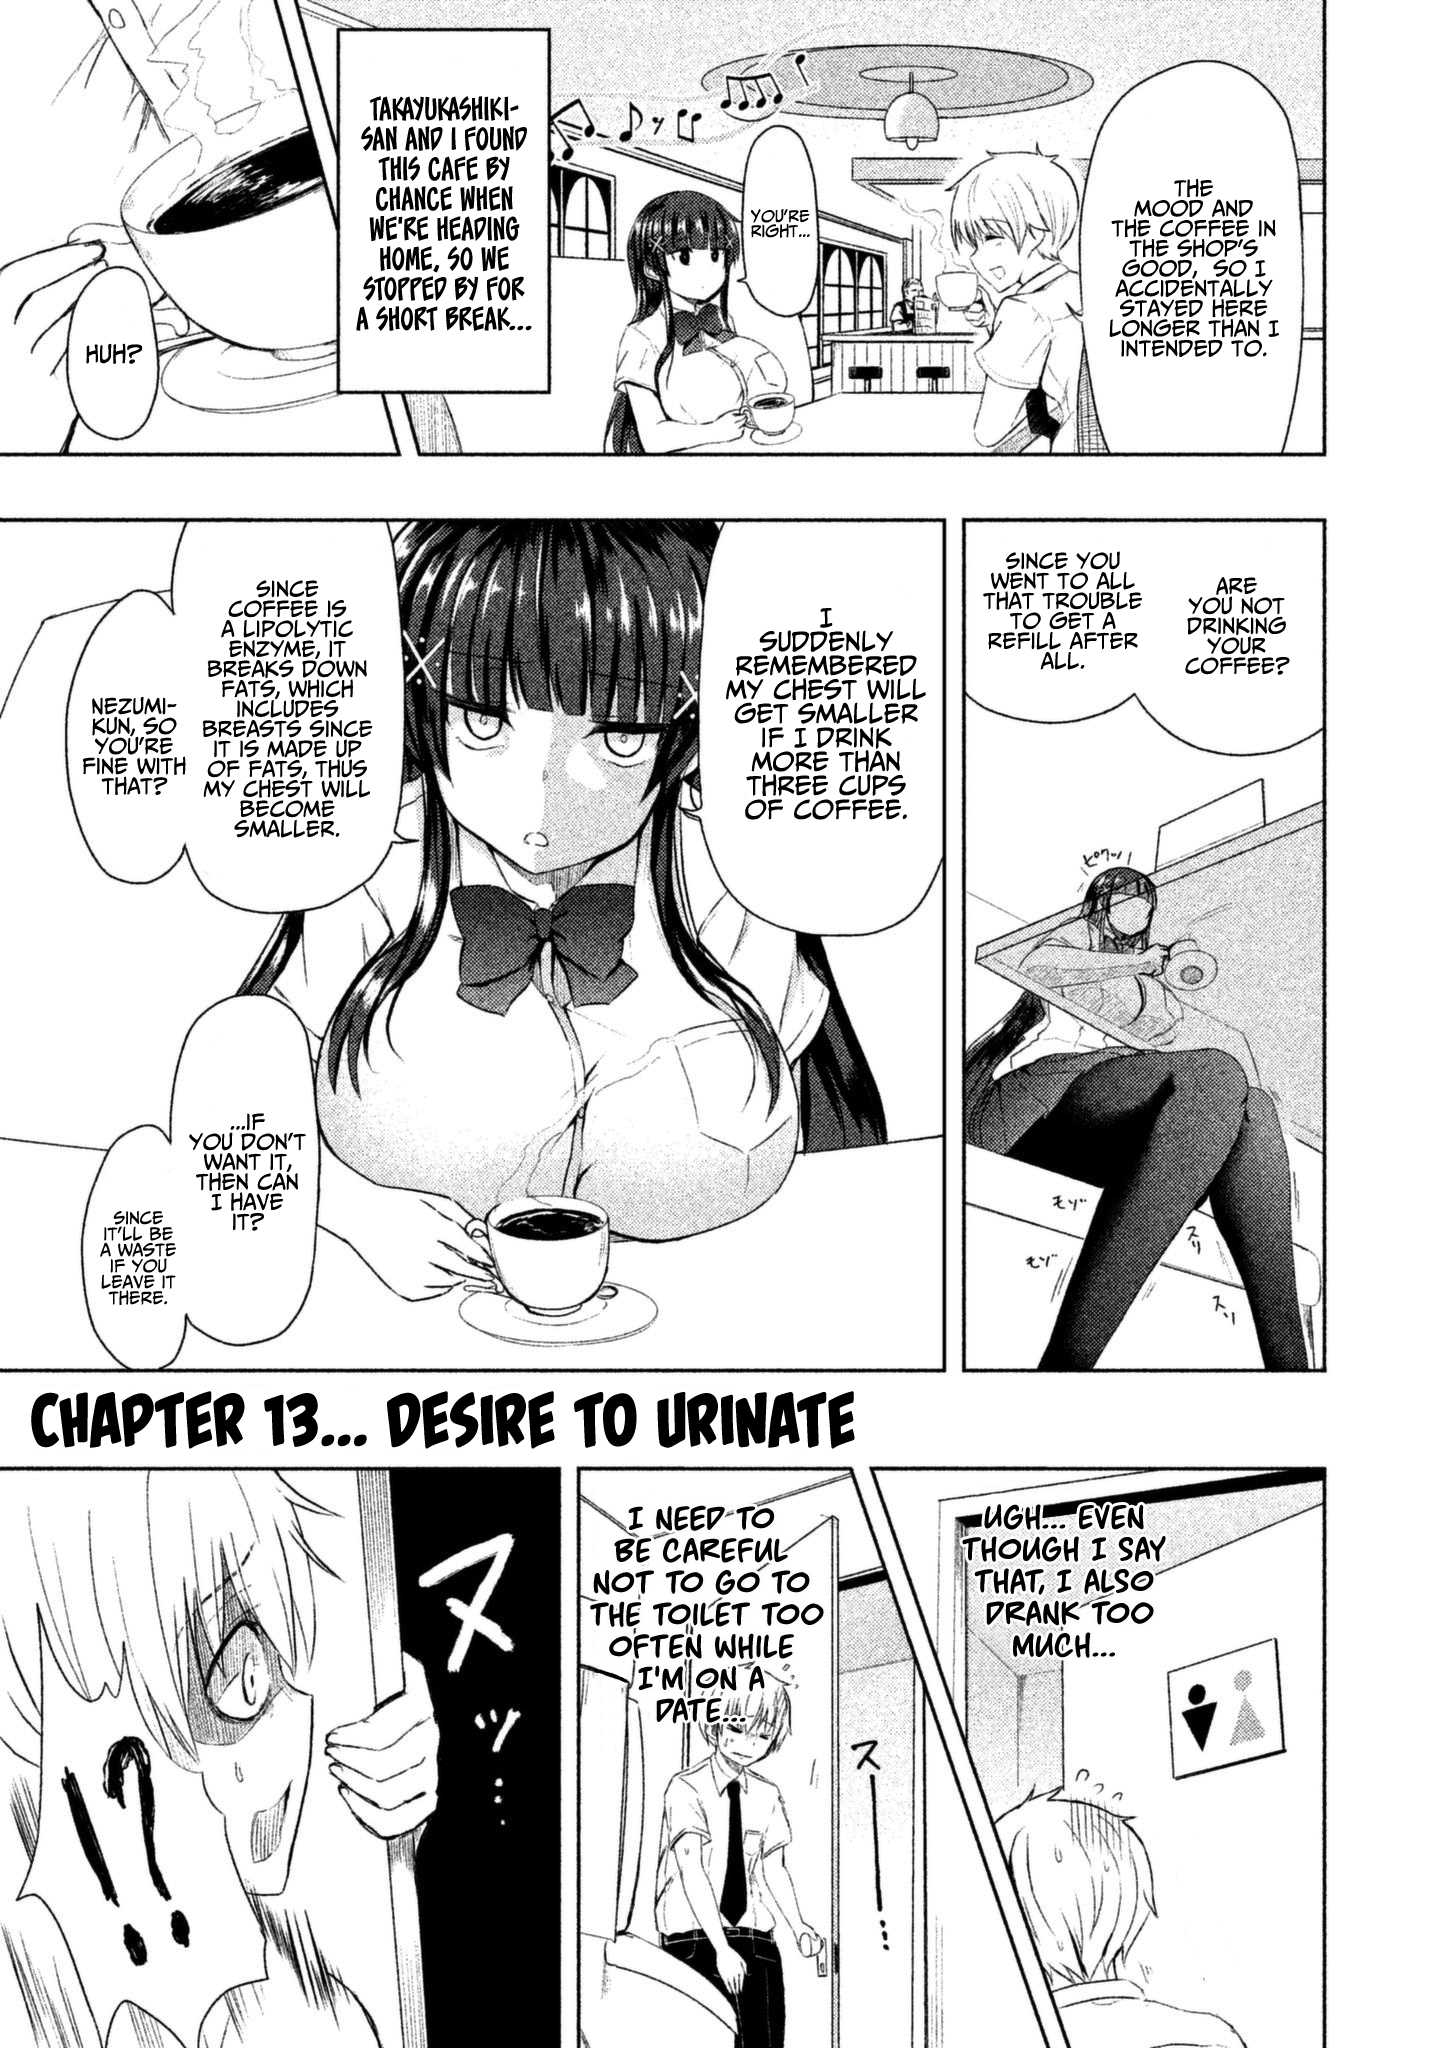 A Girl Who Is Very Well-Informed About Weird Knowledge, Takayukashiki Souko-San Chapter 13 #2